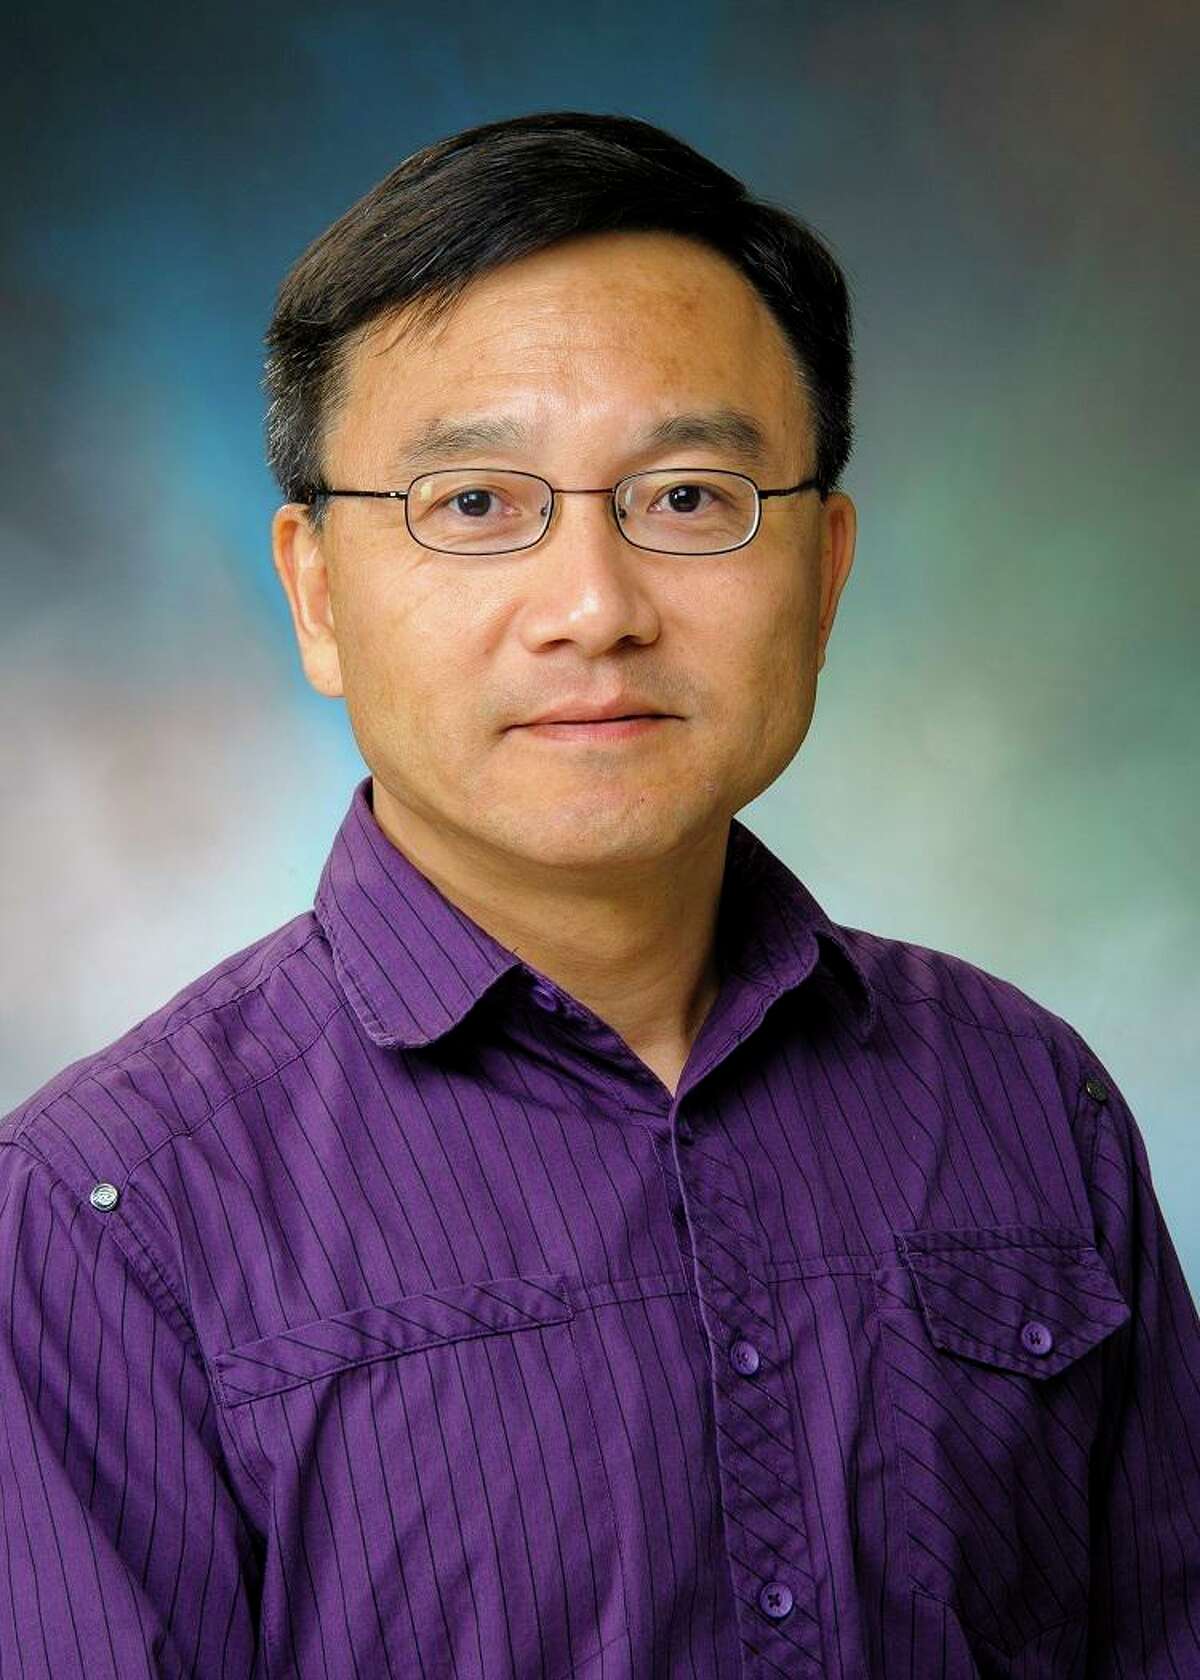 The infectious disease laboratories at the University of Texas Medical Branch in Galveston are ready to study omicron’s transmissibility and its interactions with vaccines, said Pei-Yong Shi, a professor of biochemistry and molecular biology.